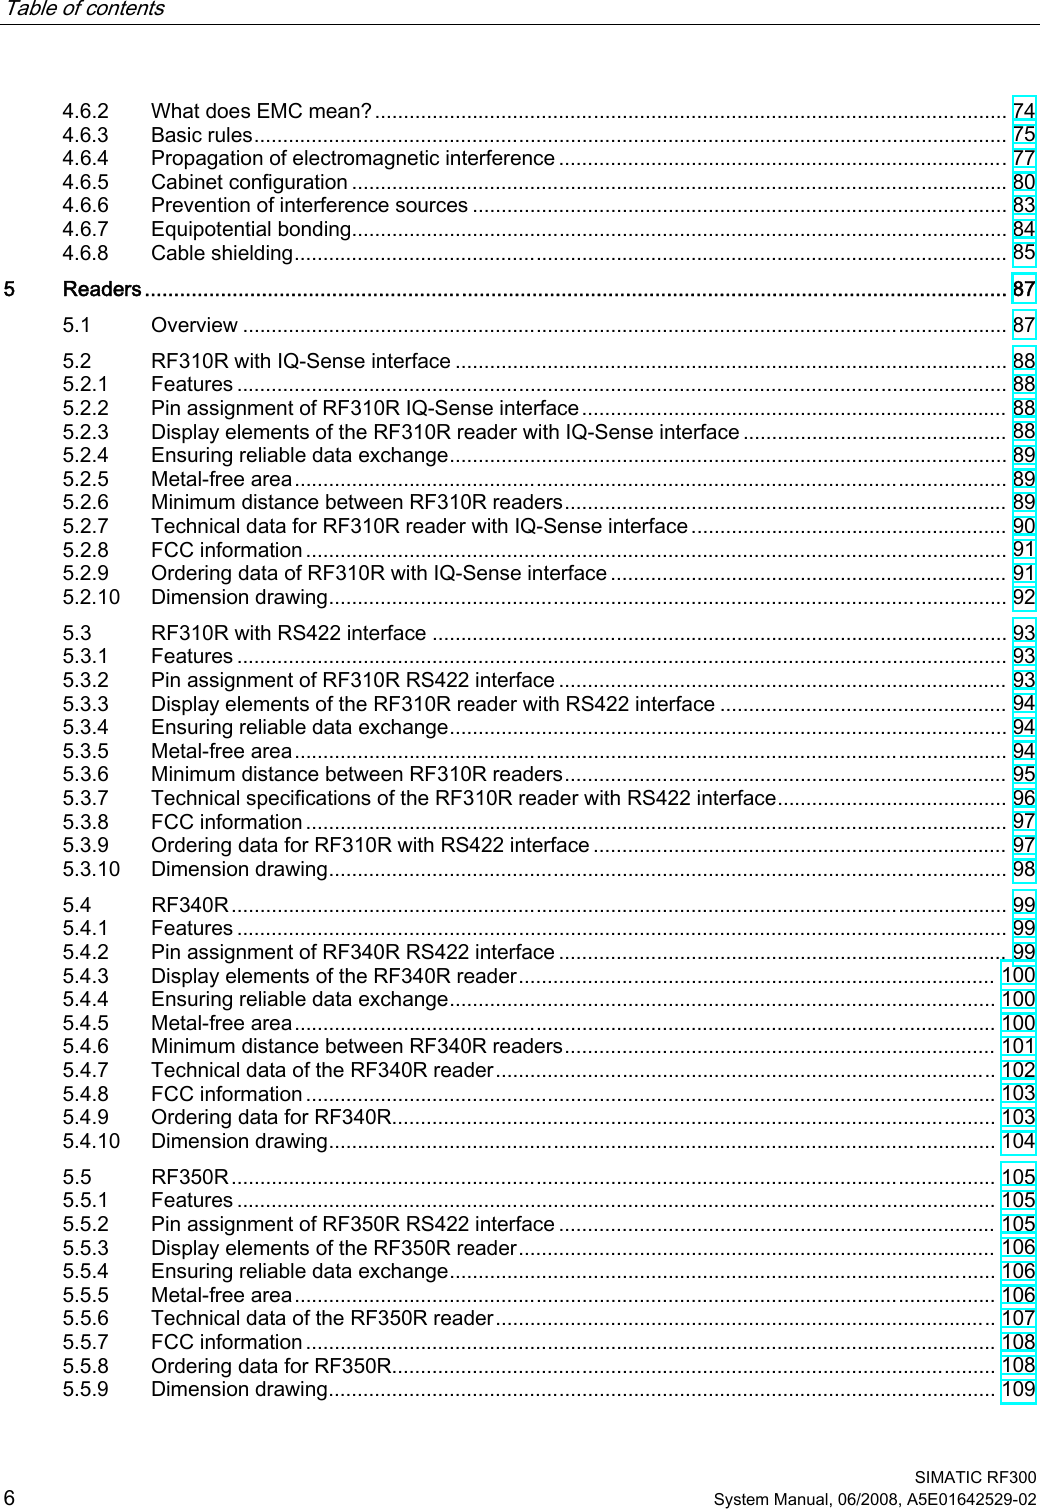 Table of contents      SIMATIC RF300 6 System Manual, 06/2008, A5E01642529-02 4.6.2  What does EMC mean?.............................................................................................................. 74 4.6.3  Basic rules................................................................................................................................... 75 4.6.4  Propagation of electromagnetic interference ..............................................................................77 4.6.5  Cabinet configuration .................................................................................................................. 80 4.6.6  Prevention of interference sources ............................................................................................. 83 4.6.7  Equipotential bonding.................................................................................................................. 84 4.6.8  Cable shielding............................................................................................................................ 85 5  Readers................................................................................................................................................... 87 5.1  Overview ..................................................................................................................................... 87 5.2  RF310R with IQ-Sense interface ................................................................................................ 88 5.2.1  Features ...................................................................................................................................... 88 5.2.2  Pin assignment of RF310R IQ-Sense interface.......................................................................... 88 5.2.3  Display elements of the RF310R reader with IQ-Sense interface .............................................. 88 5.2.4  Ensuring reliable data exchange................................................................................................. 89 5.2.5  Metal-free area............................................................................................................................ 89 5.2.6  Minimum distance between RF310R readers............................................................................. 89 5.2.7  Technical data for RF310R reader with IQ-Sense interface....................................................... 90 5.2.8  FCC information .......................................................................................................................... 91 5.2.9  Ordering data of RF310R with IQ-Sense interface ..................................................................... 91 5.2.10  Dimension drawing...................................................................................................................... 92 5.3  RF310R with RS422 interface .................................................................................................... 93 5.3.1  Features ...................................................................................................................................... 93 5.3.2  Pin assignment of RF310R RS422 interface .............................................................................. 93 5.3.3  Display elements of the RF310R reader with RS422 interface .................................................. 94 5.3.4  Ensuring reliable data exchange................................................................................................. 94 5.3.5  Metal-free area............................................................................................................................ 94 5.3.6  Minimum distance between RF310R readers............................................................................. 95 5.3.7  Technical specifications of the RF310R reader with RS422 interface........................................ 96 5.3.8  FCC information .......................................................................................................................... 97 5.3.9  Ordering data for RF310R with RS422 interface ........................................................................ 97 5.3.10  Dimension drawing...................................................................................................................... 98 5.4  RF340R....................................................................................................................................... 99 5.4.1  Features ...................................................................................................................................... 99 5.4.2  Pin assignment of RF340R RS422 interface .............................................................................. 99 5.4.3  Display elements of the RF340R reader................................................................................... 100 5.4.4  Ensuring reliable data exchange............................................................................................... 100 5.4.5  Metal-free area.......................................................................................................................... 100 5.4.6  Minimum distance between RF340R readers........................................................................... 101 5.4.7  Technical data of the RF340R reader....................................................................................... 102 5.4.8  FCC information ........................................................................................................................ 103 5.4.9  Ordering data for RF340R......................................................................................................... 103 5.4.10  Dimension drawing.................................................................................................................... 104 5.5  RF350R..................................................................................................................................... 105 5.5.1  Features .................................................................................................................................... 105 5.5.2  Pin assignment of RF350R RS422 interface ............................................................................ 105 5.5.3  Display elements of the RF350R reader................................................................................... 106 5.5.4  Ensuring reliable data exchange............................................................................................... 106 5.5.5  Metal-free area.......................................................................................................................... 106 5.5.6  Technical data of the RF350R reader....................................................................................... 107 5.5.7  FCC information ........................................................................................................................ 108 5.5.8  Ordering data for RF350R......................................................................................................... 108 5.5.9  Dimension drawing.................................................................................................................... 109 